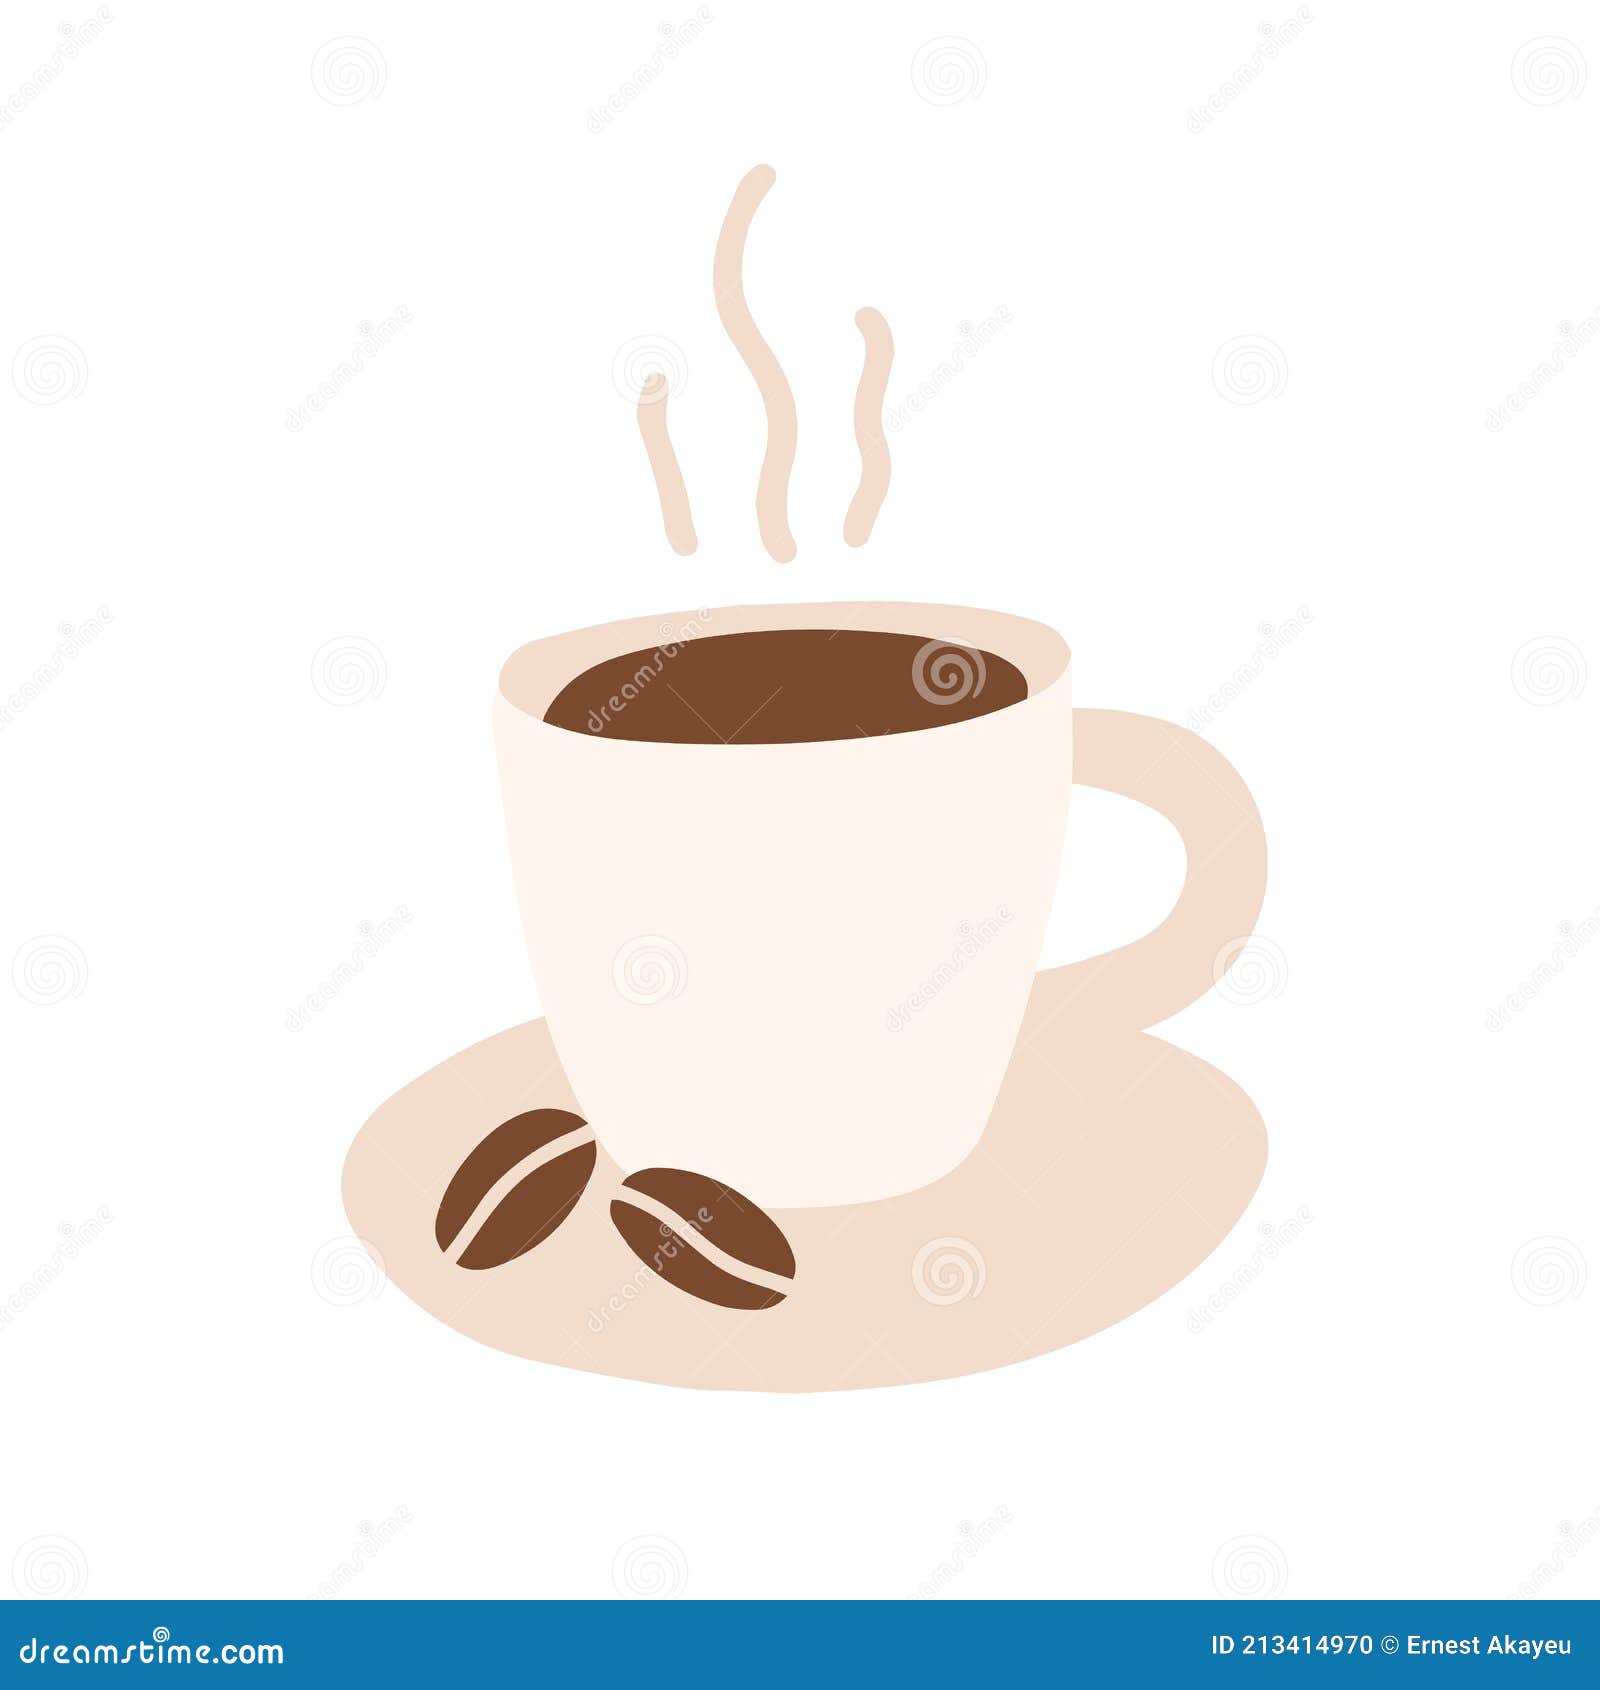 morning coffee cup with hot freshly brewed espresso or americano. mug of aromatic caffeine drink with steam, saucer and